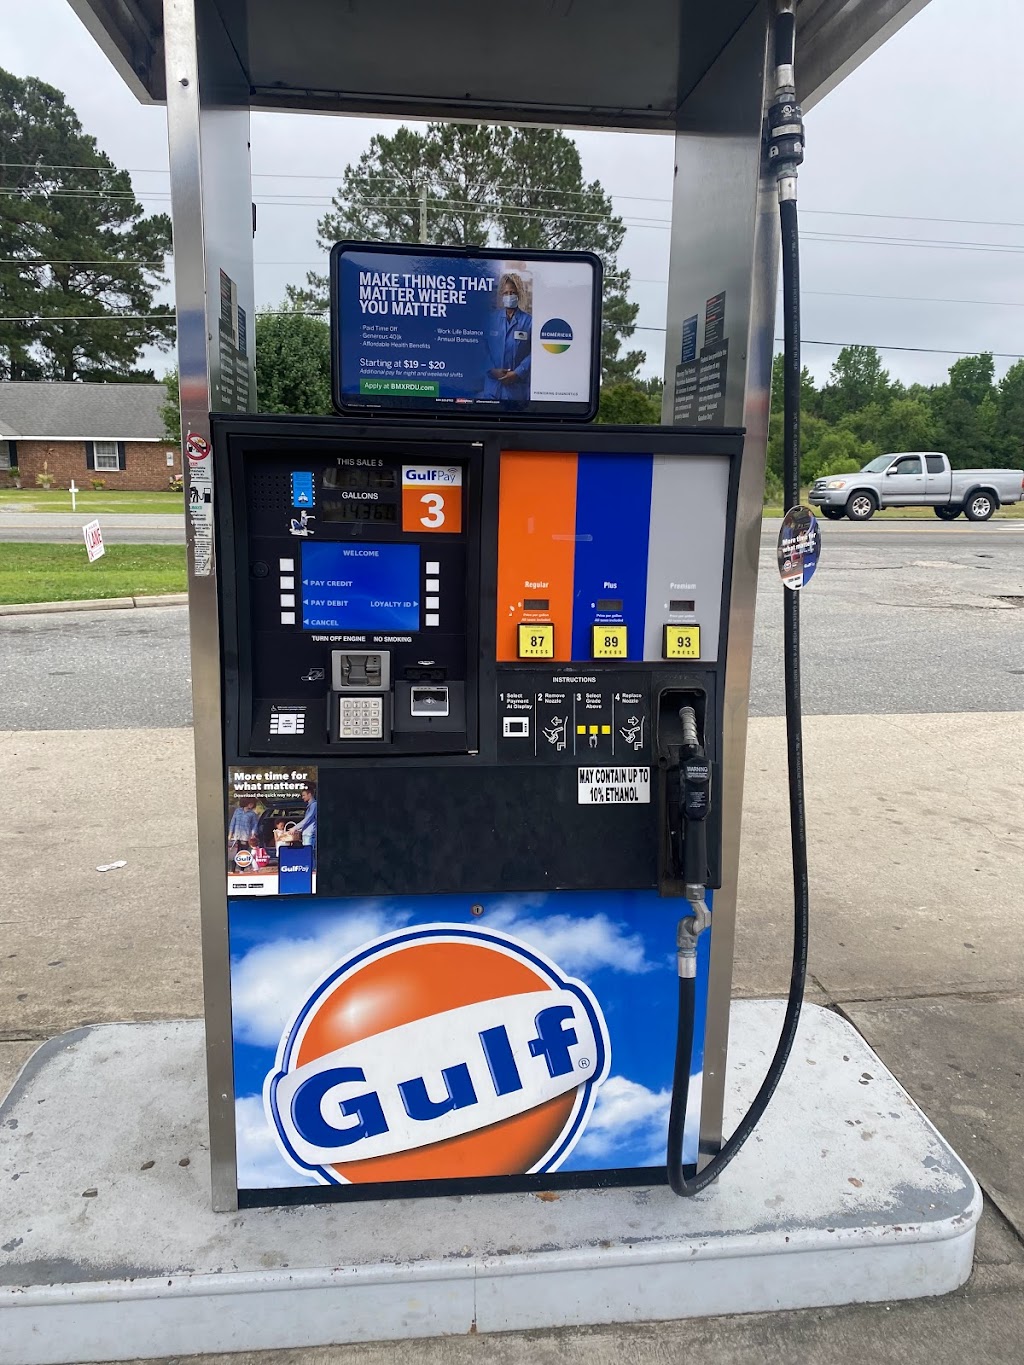 Holt Lake Gas And Grill | 4056 U.S. Hwy 301 S, Four Oaks, NC 27524, USA | Phone: (919) 934-0107